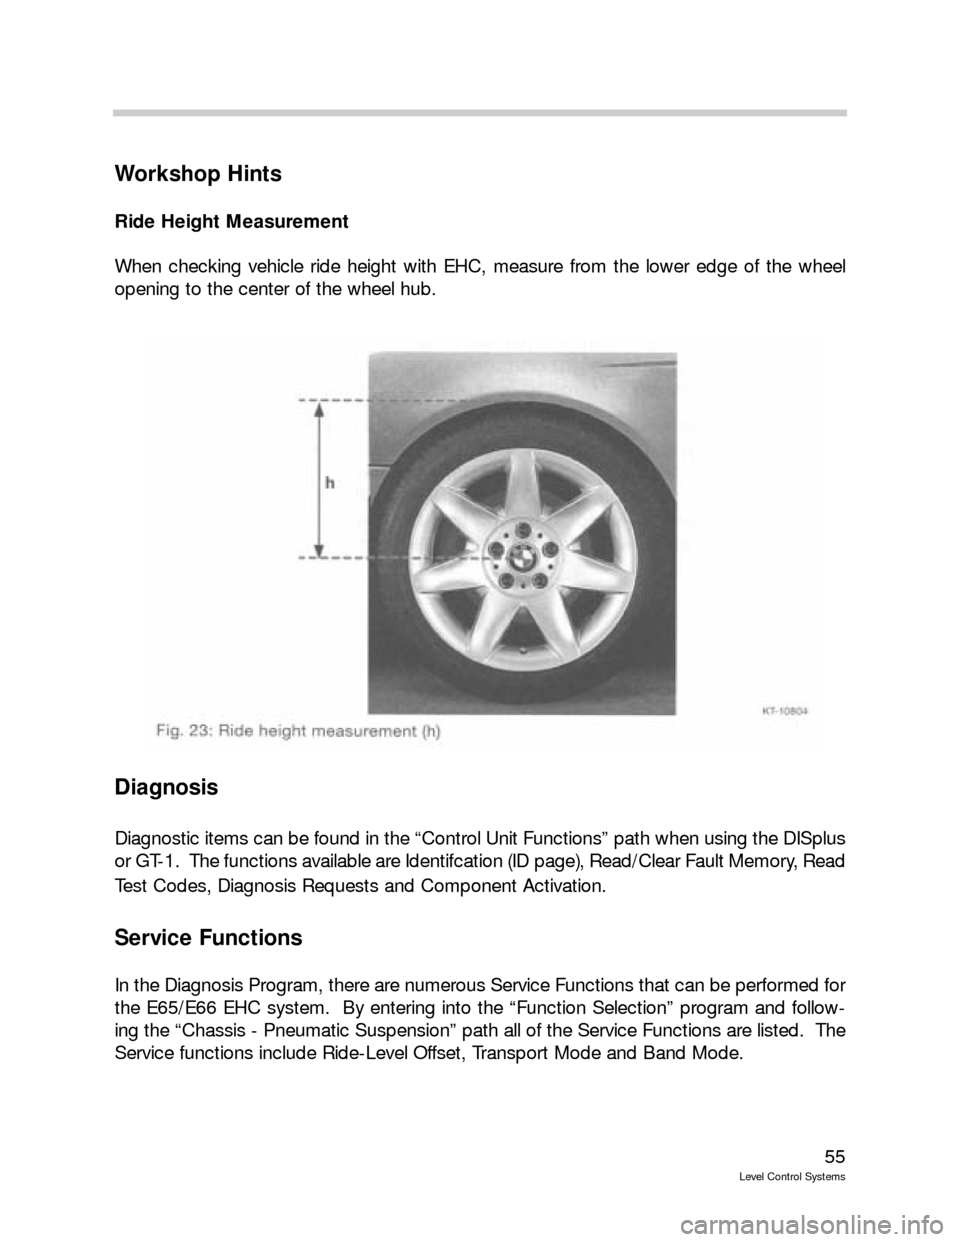 BMW X5 1999 E53 Level Control System Manual 55
Level Control Systems
Workshop Hints
Ride Height Measurement
When checking vehicle ride height with EHC, measure from the lower edge of the wheel
opening to the center of the wheel hub.  
Diagnosis